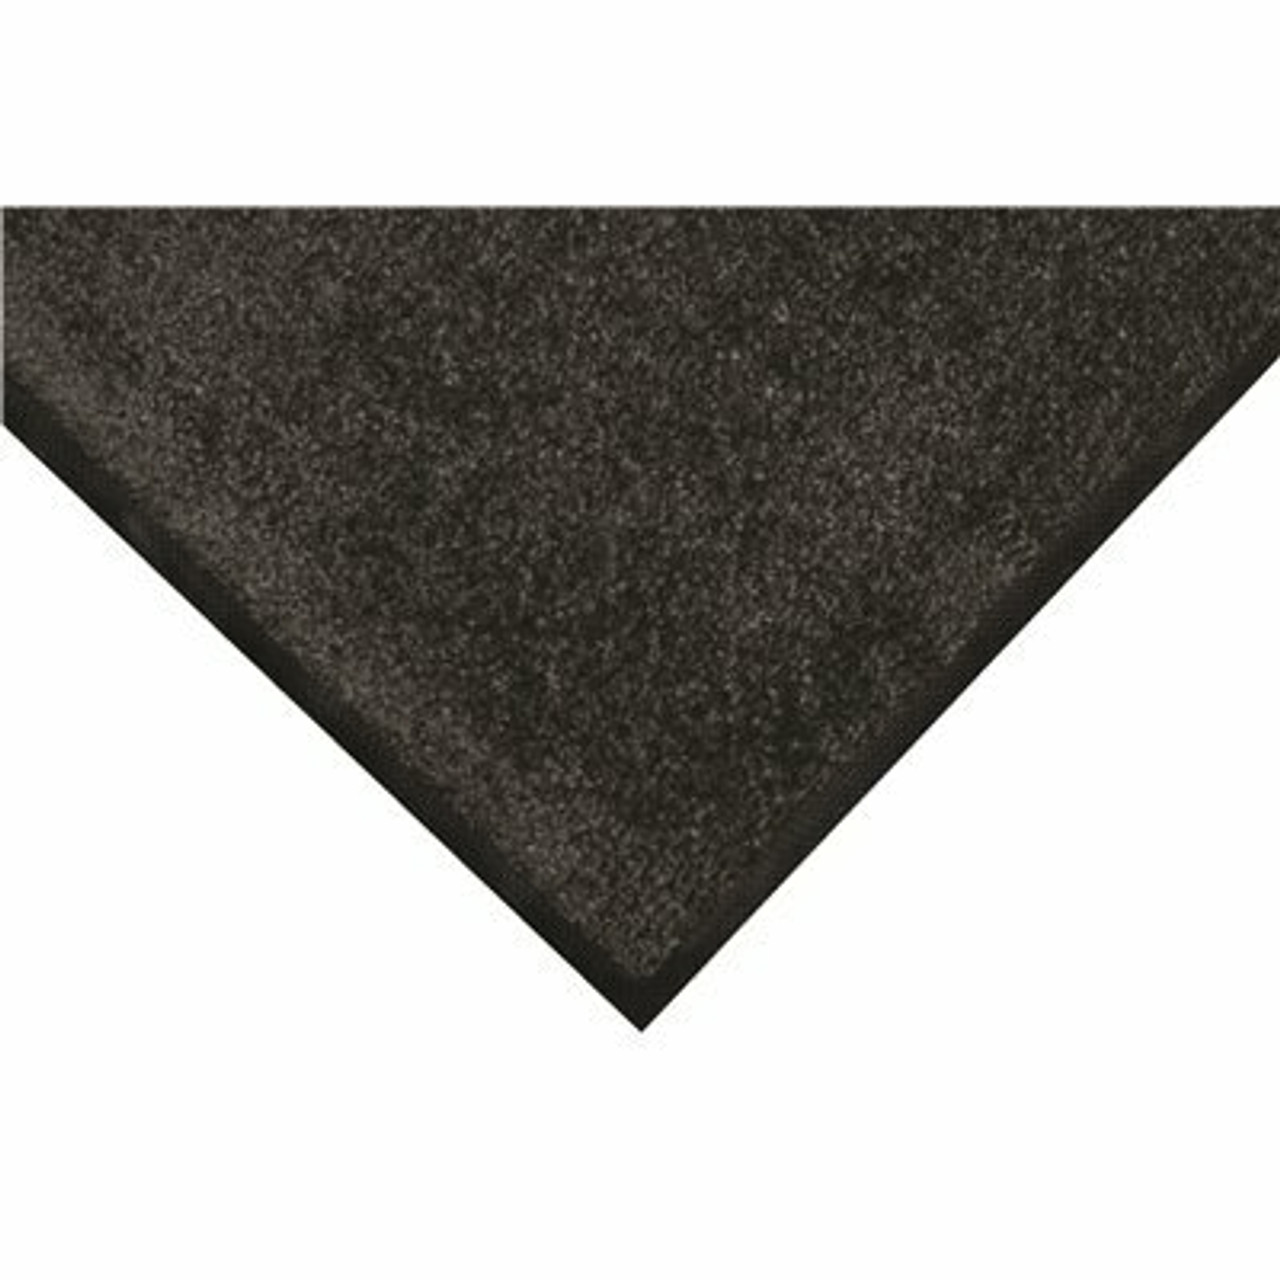 M+A Matting Colorstar Mat Cabot Grey 69 In. X 45 In. Pet Carpet Universal Cleated Backing Commercial Floor Mat